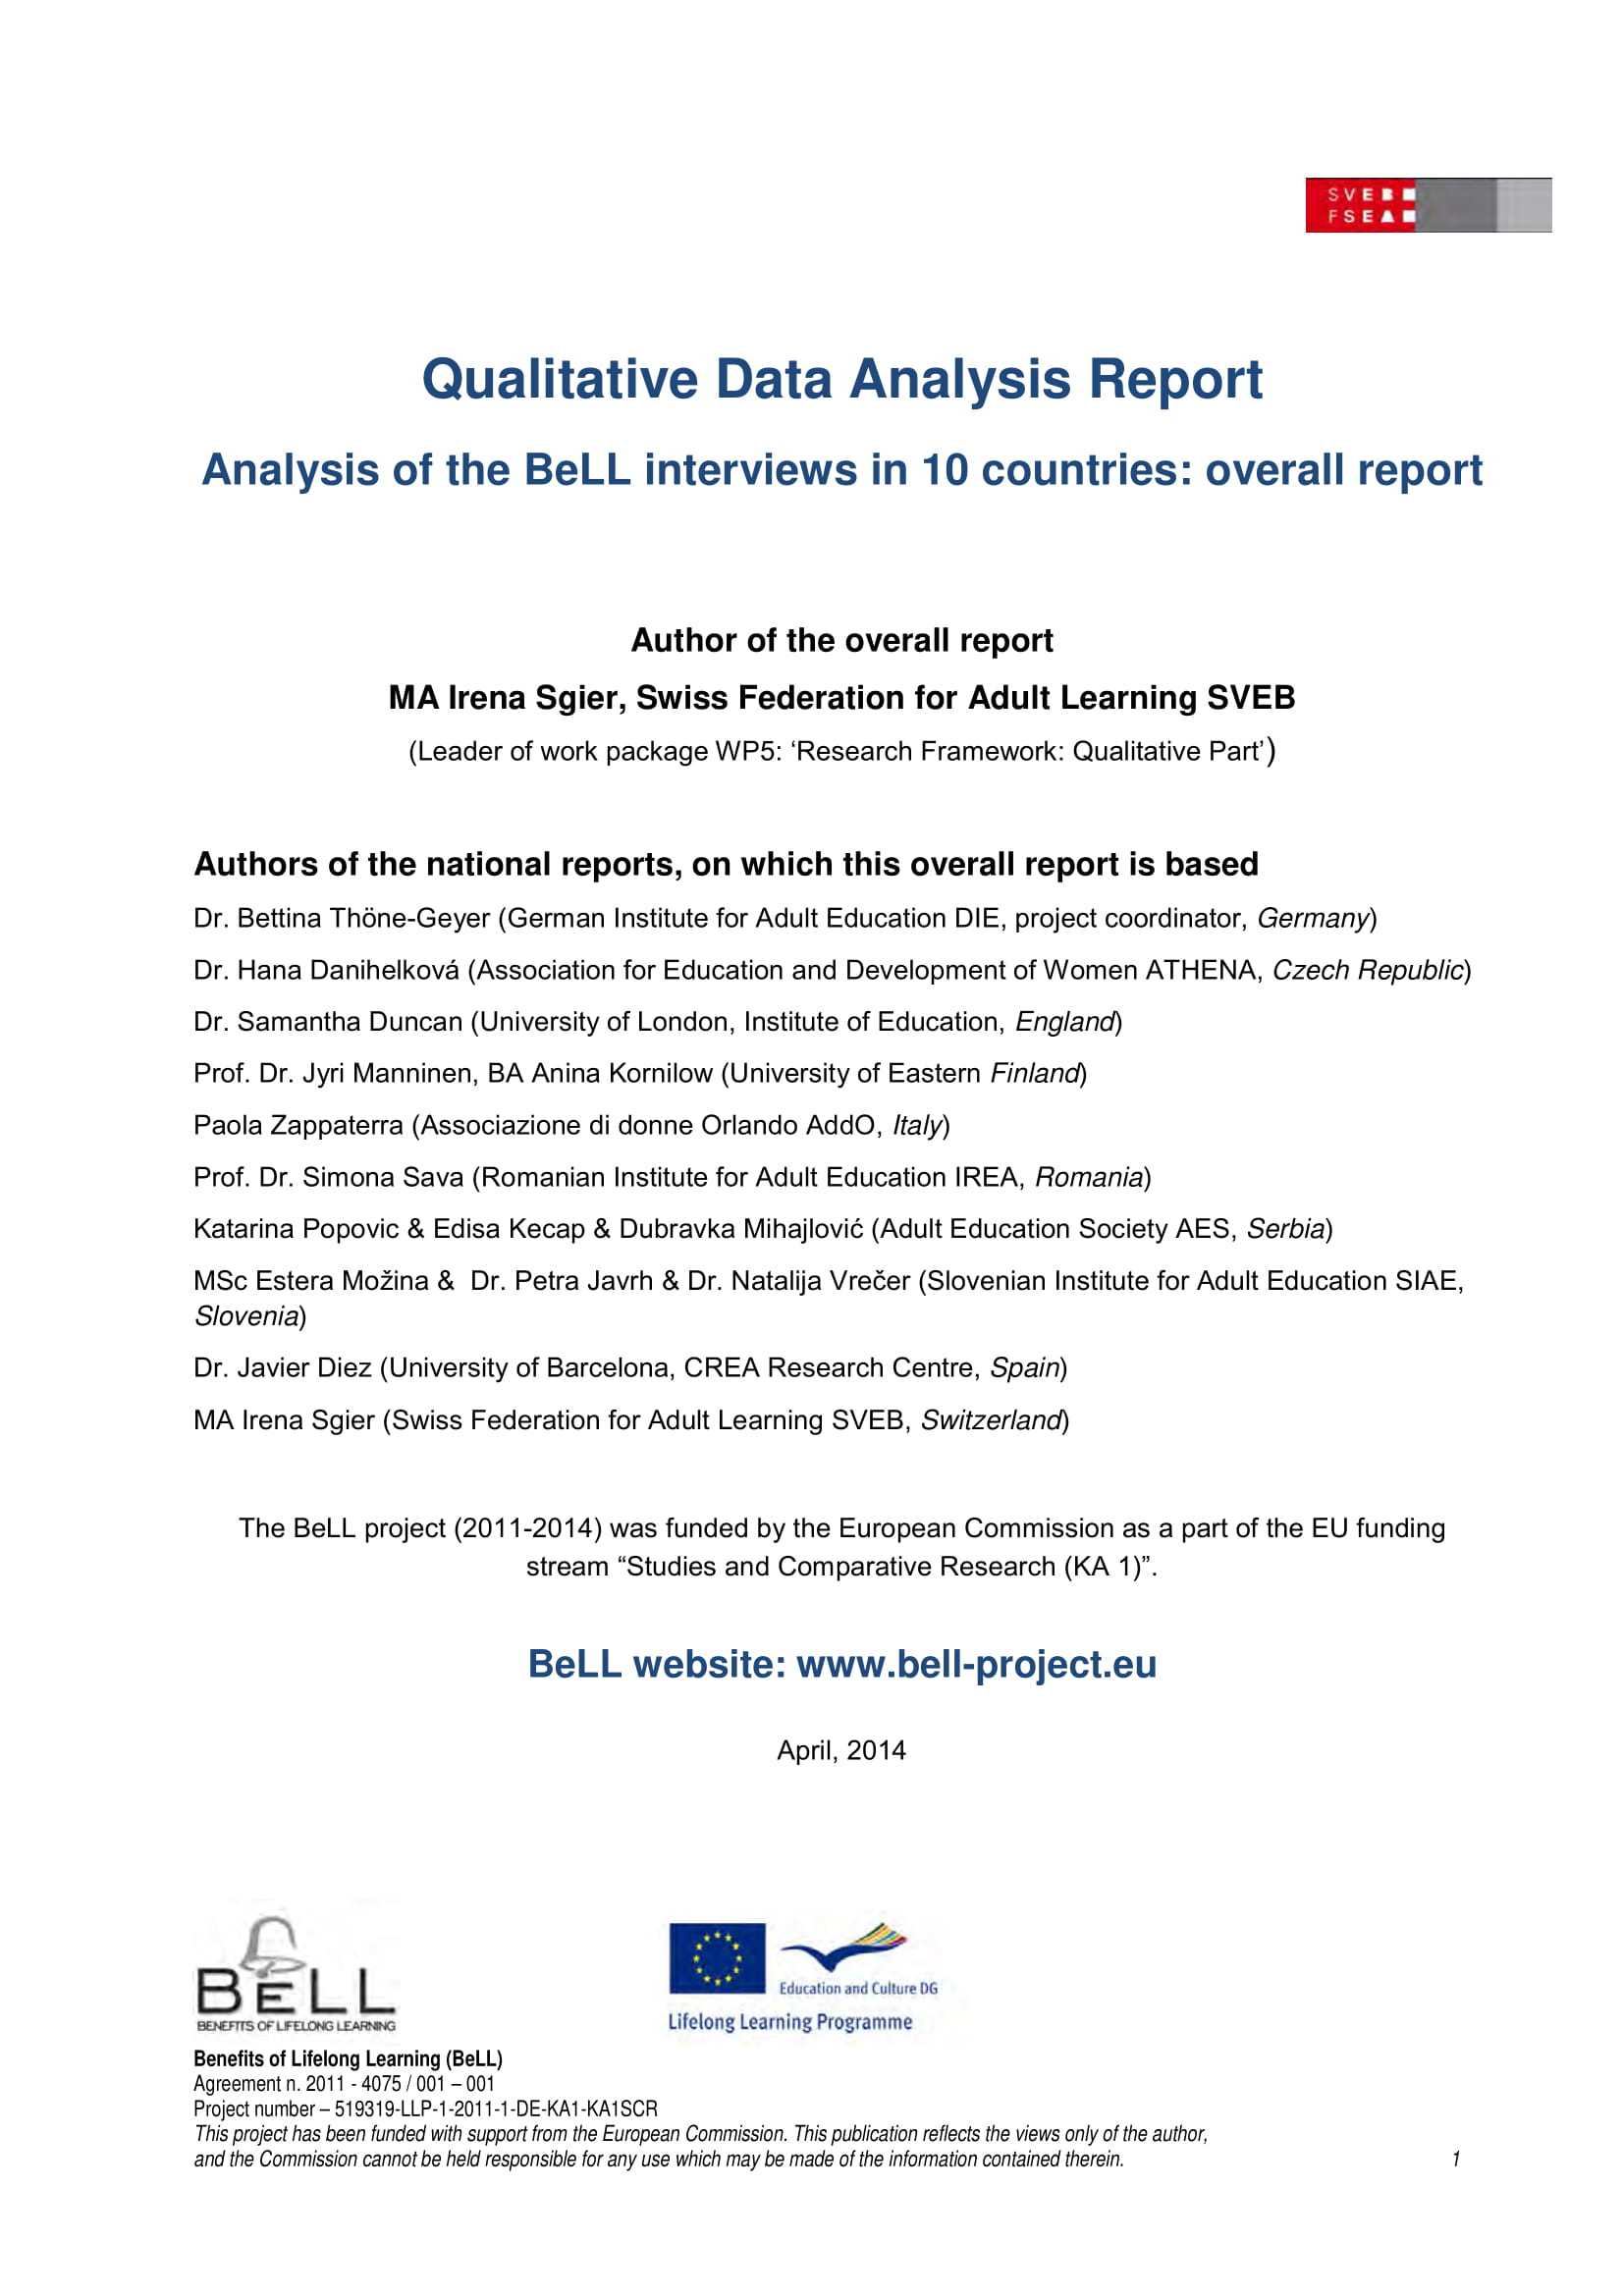 10 Data Analysis Report Examples - Pdf | Examples Throughout Analytical Report Template